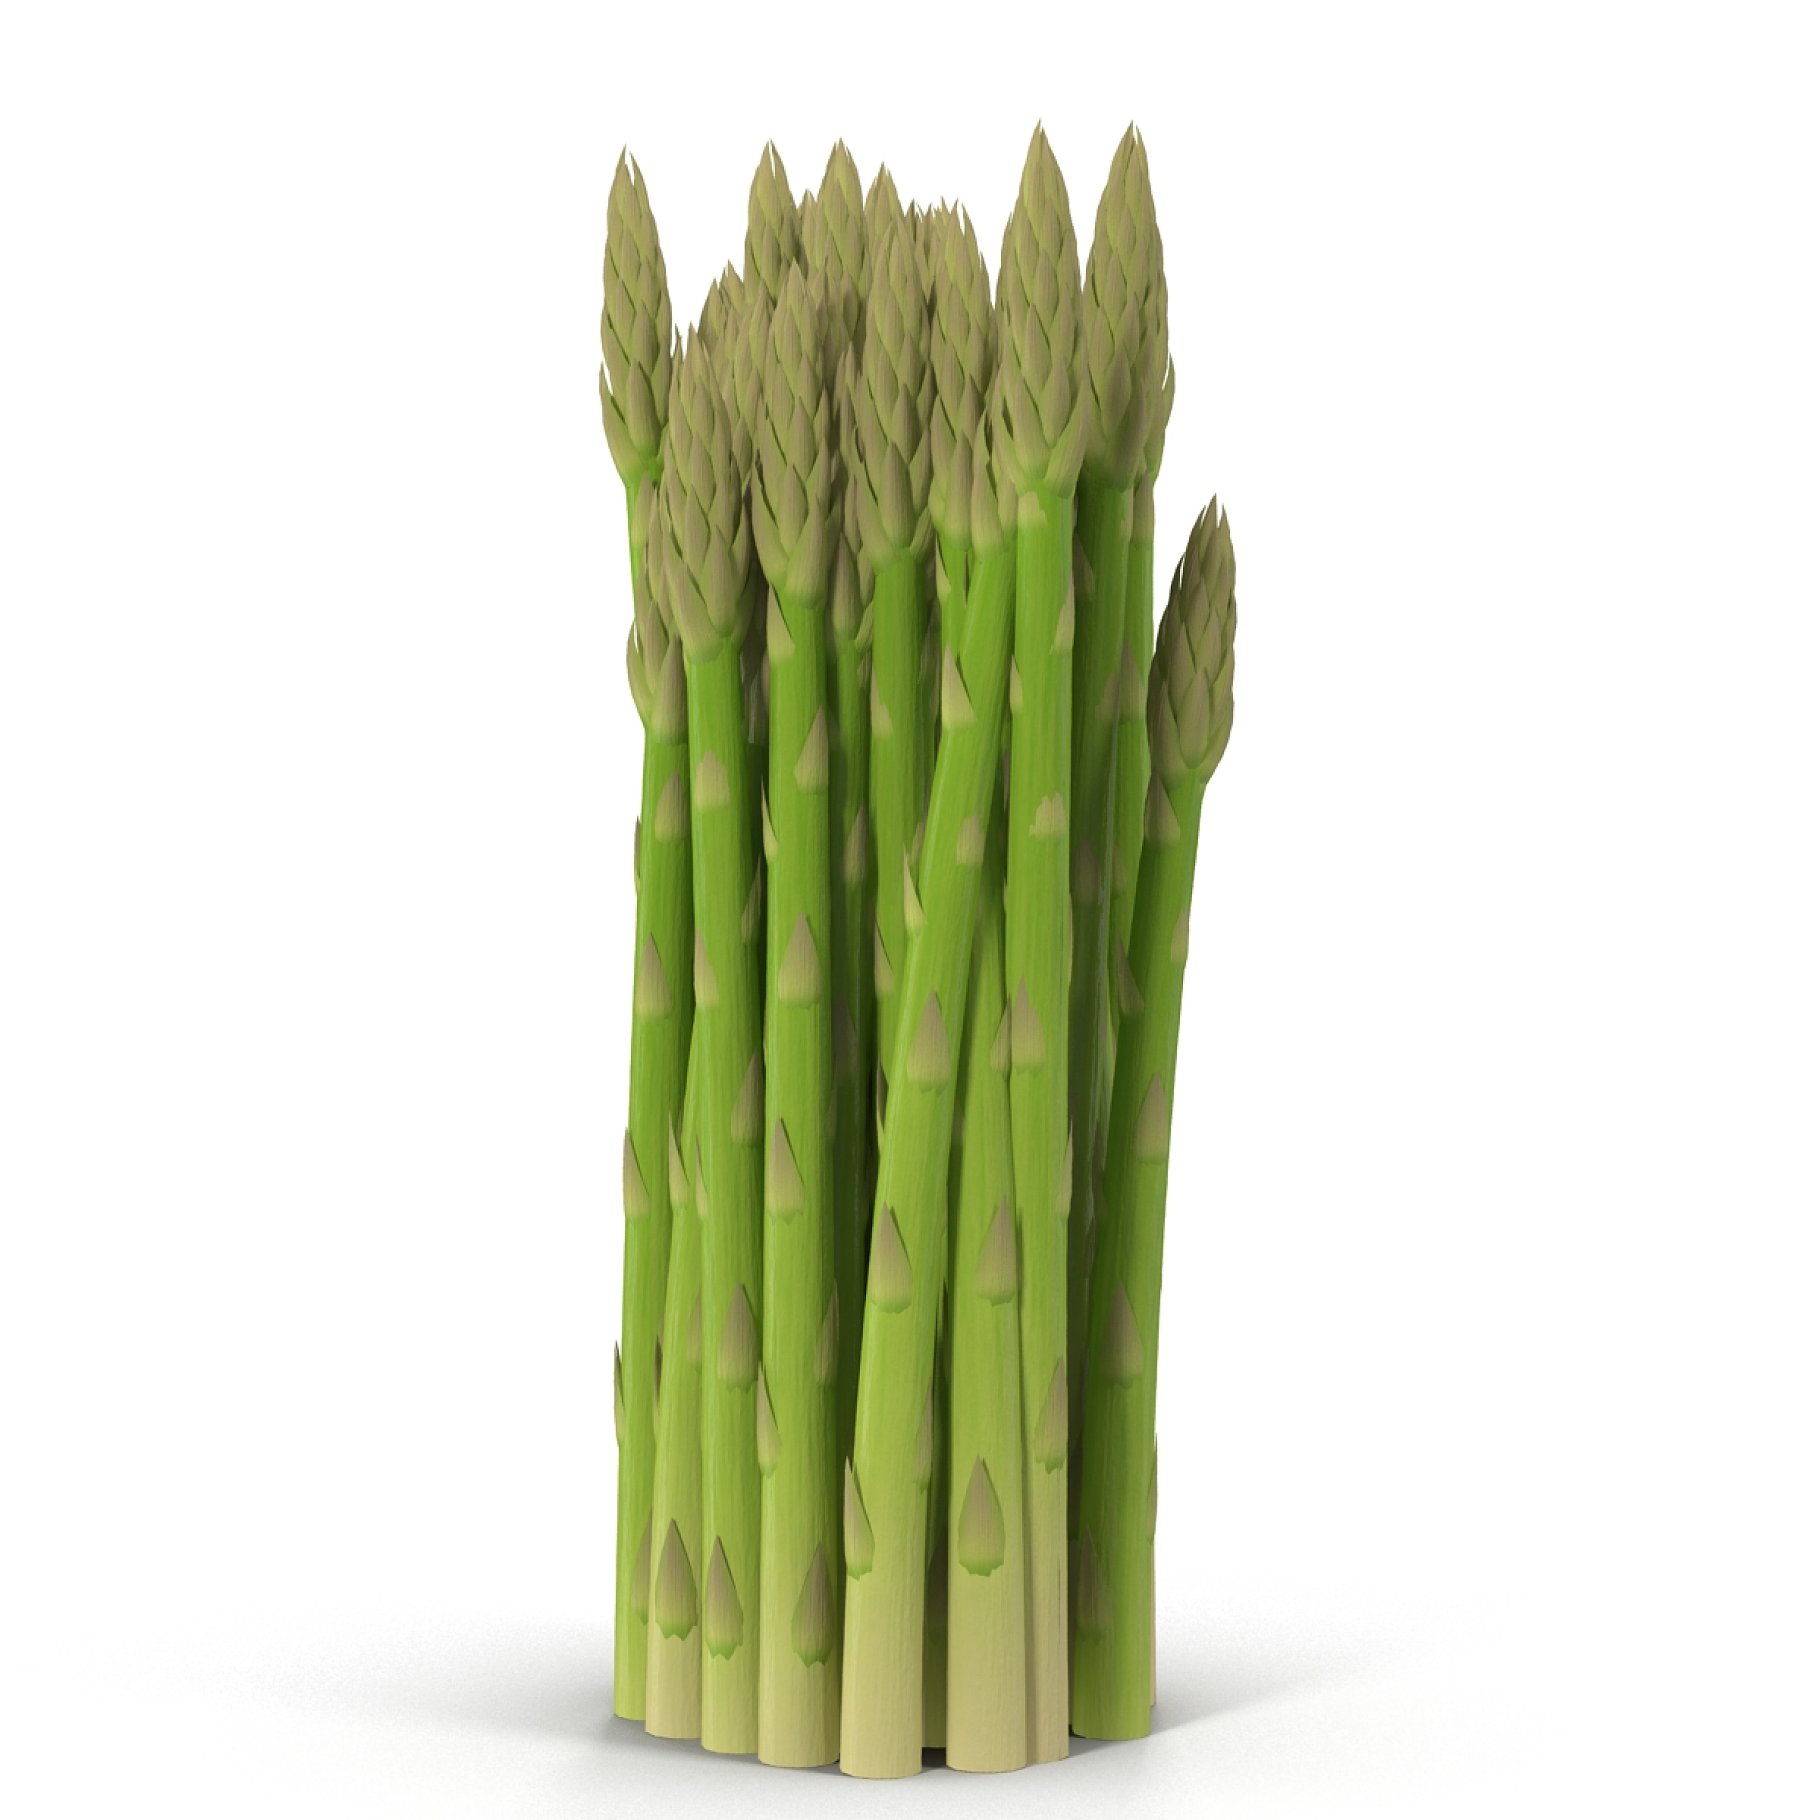 Great images of asparagus.